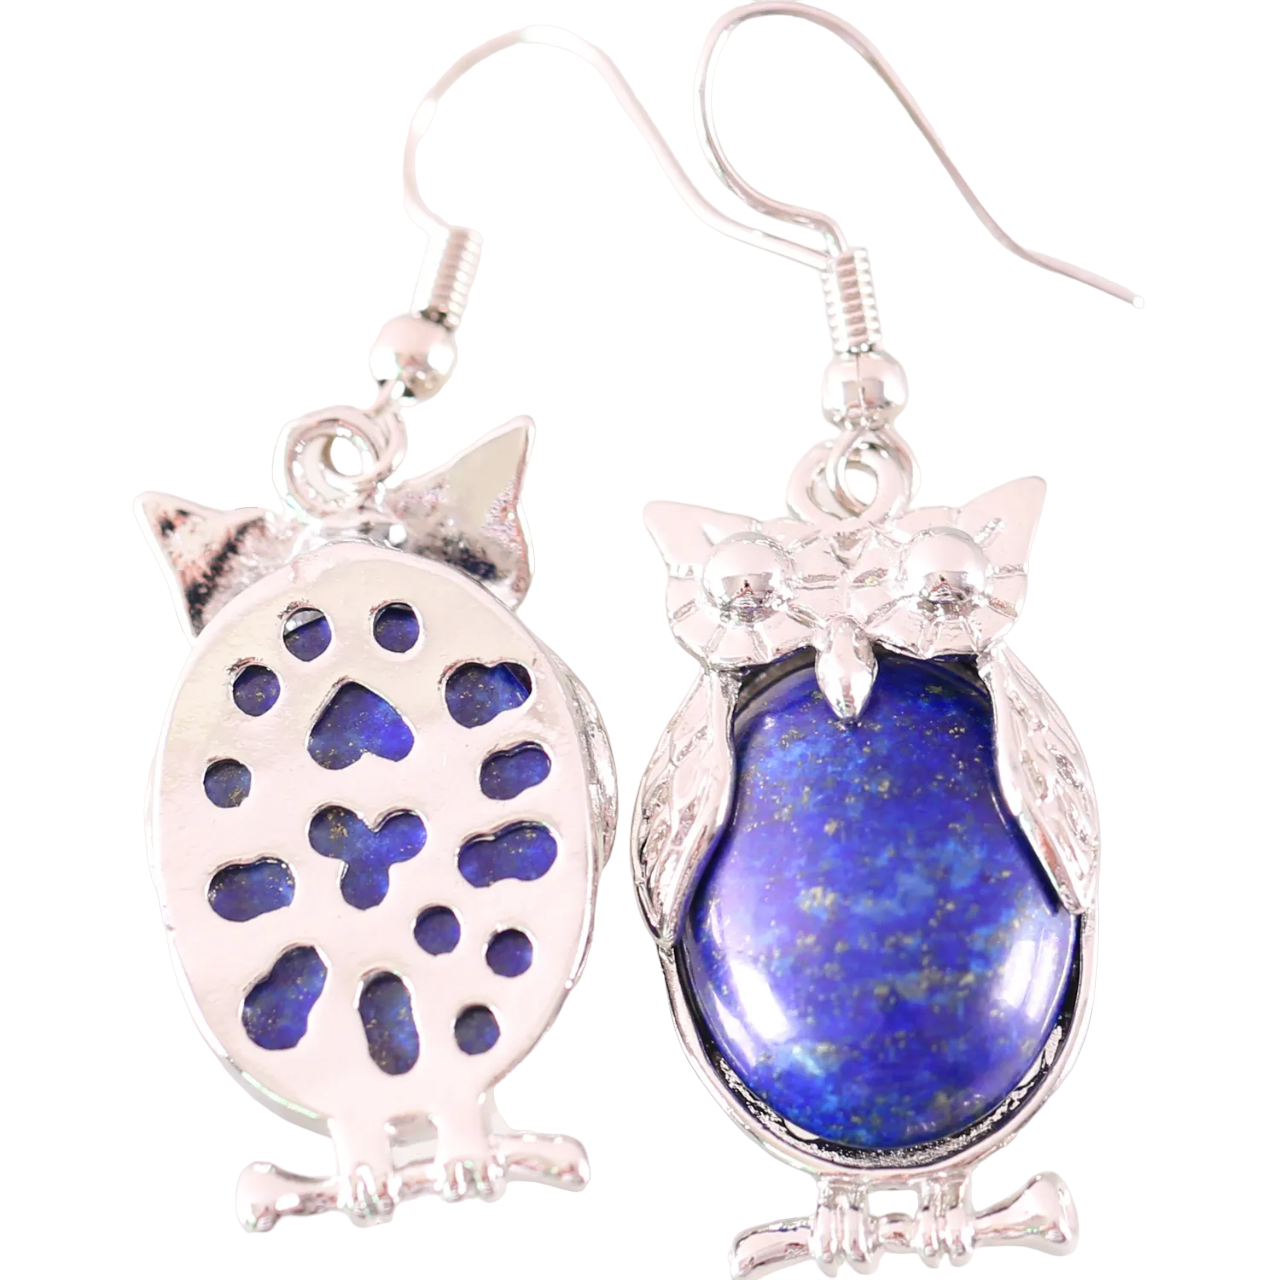 Owl Earrings With Blue Stones